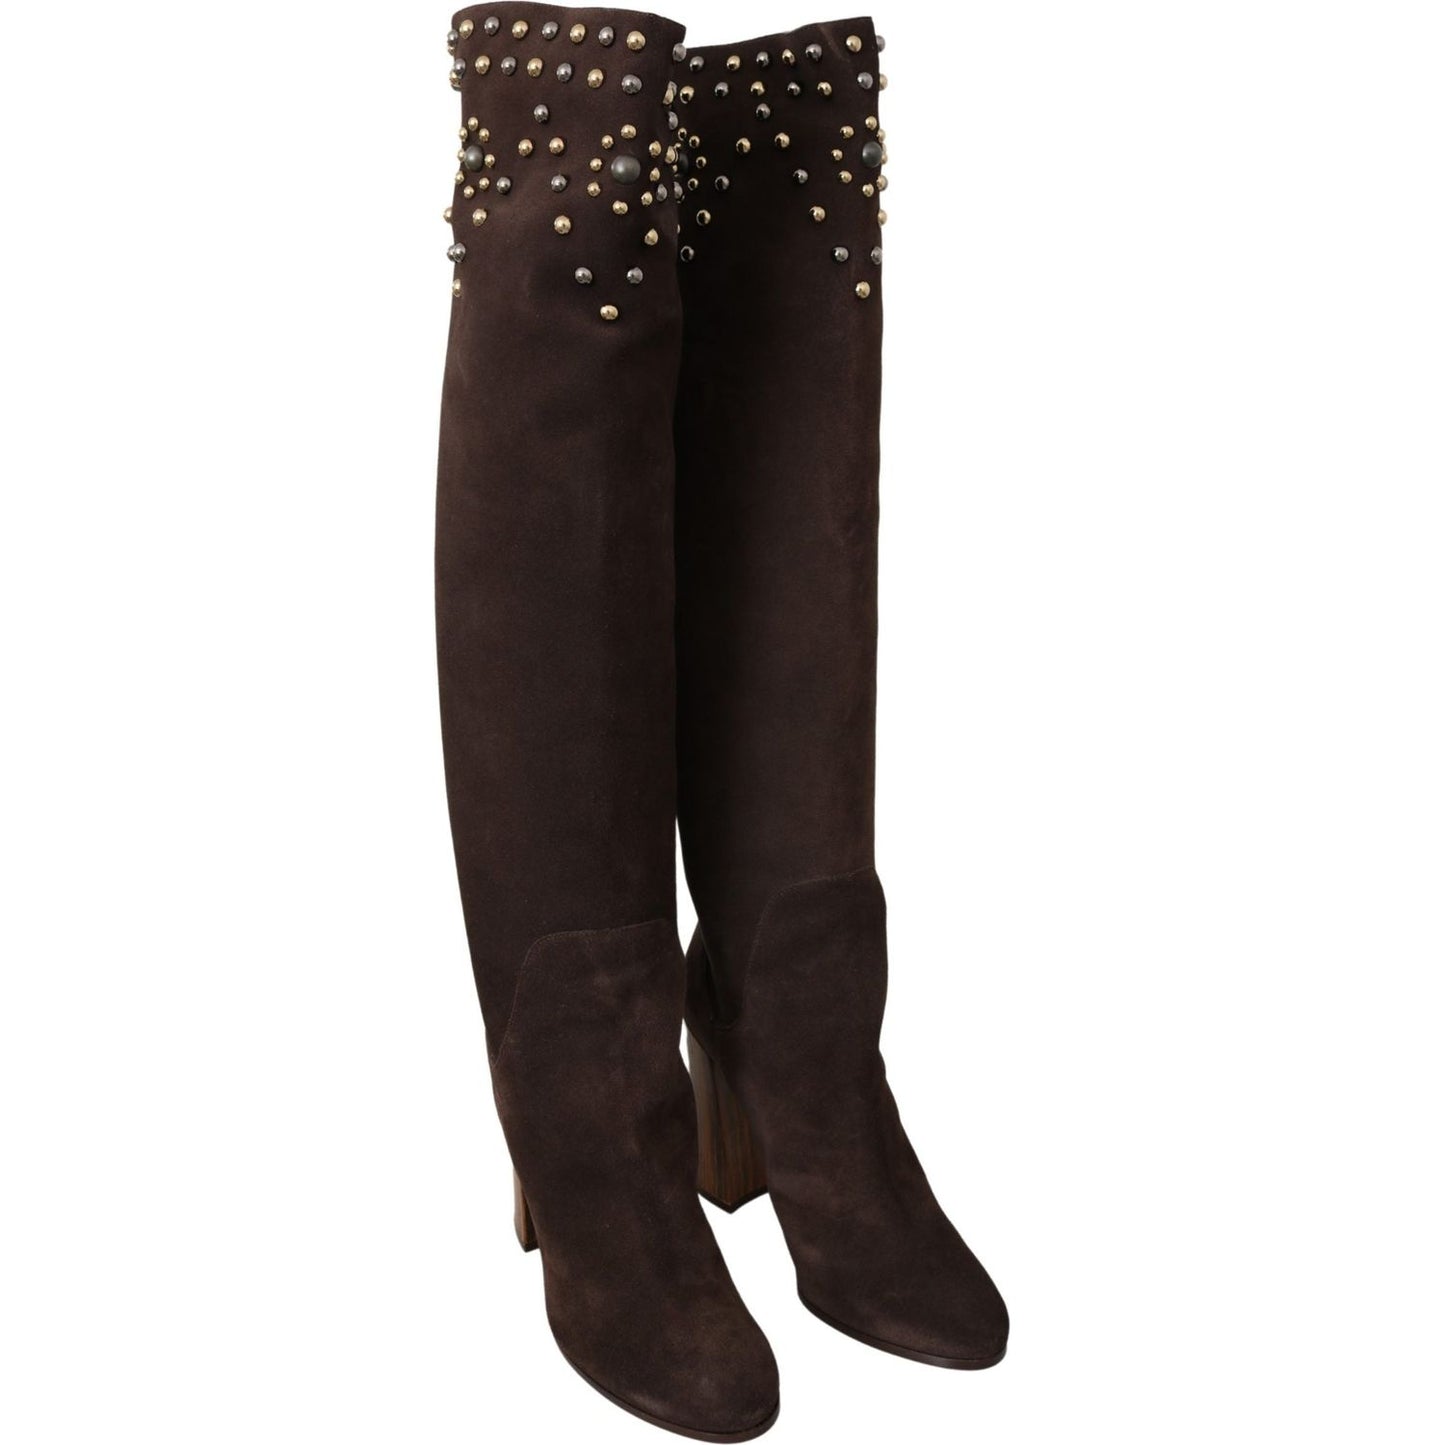 Dolce & Gabbana Studded Suede Knee High Boots in Brown brown-suede-studded-knee-high-shoes-boots IMG_1082-scaled-958716b6-843.jpg